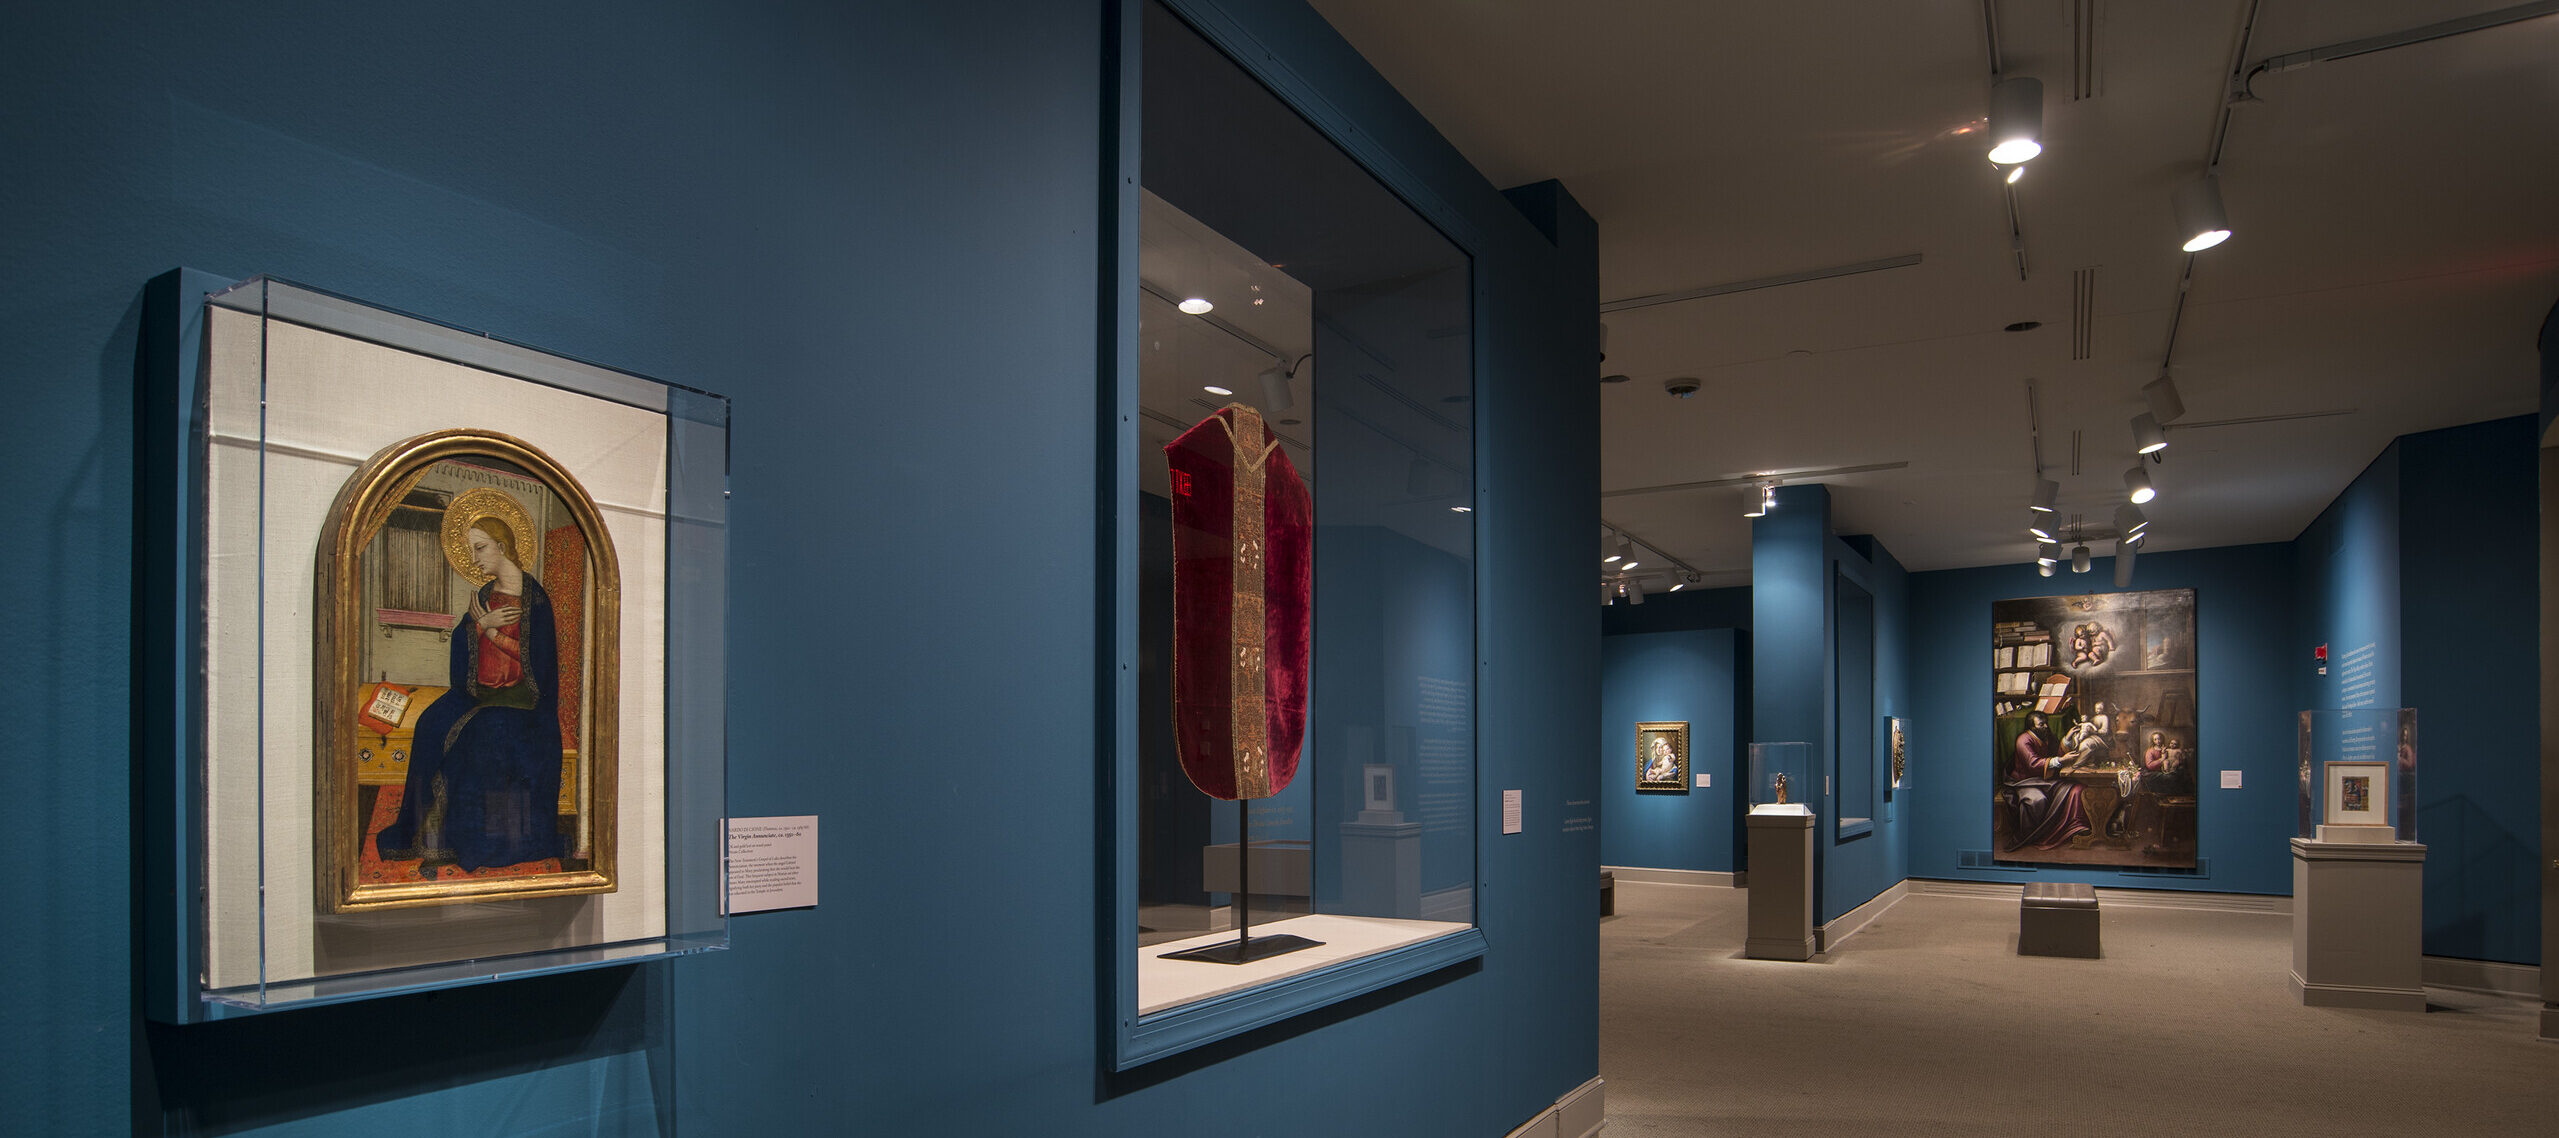 View of a gallery space with blue walls. On the left is a painting of a woman in a dark blue dress in a golden frame. Next to it is a red cloth framed in glass.